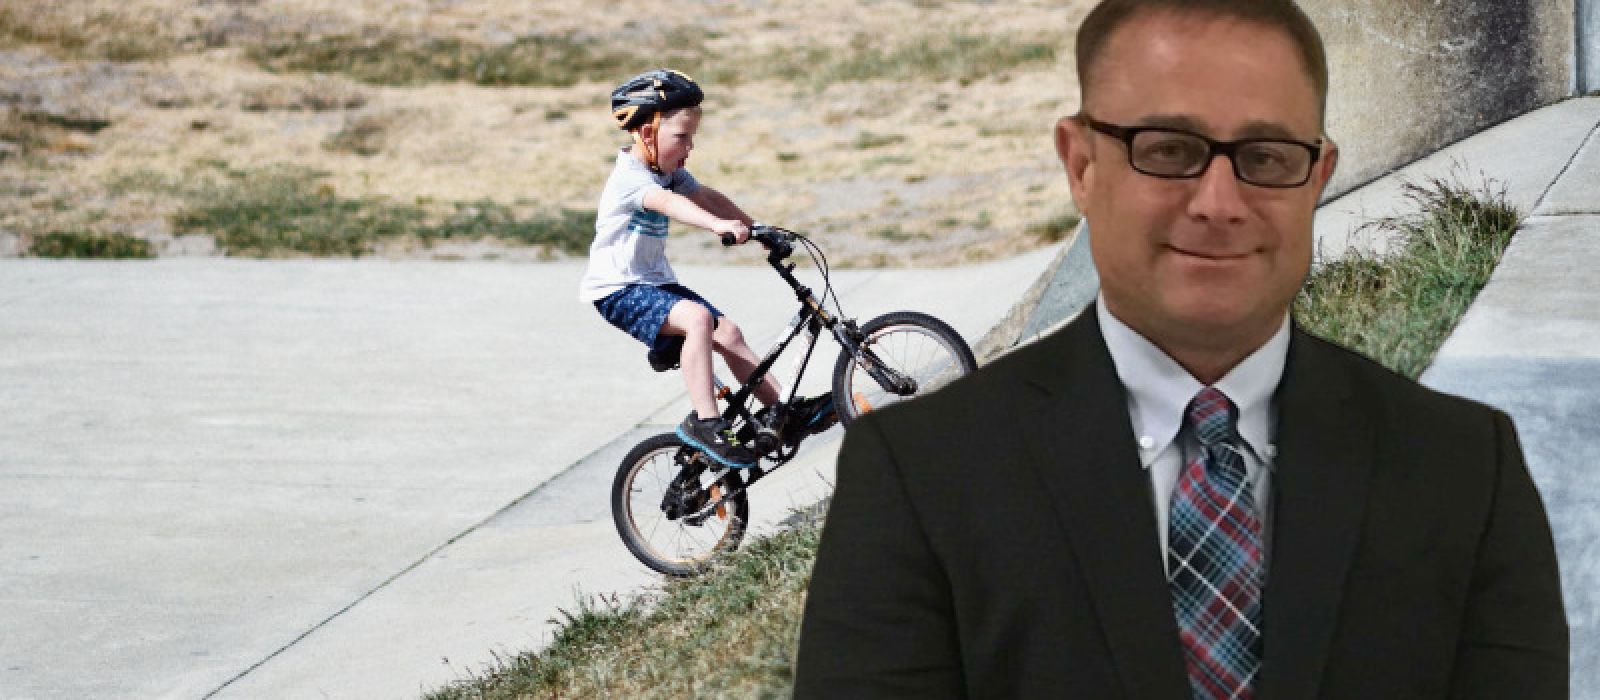 Los Angeles Child Bicycle Injury Lawyers